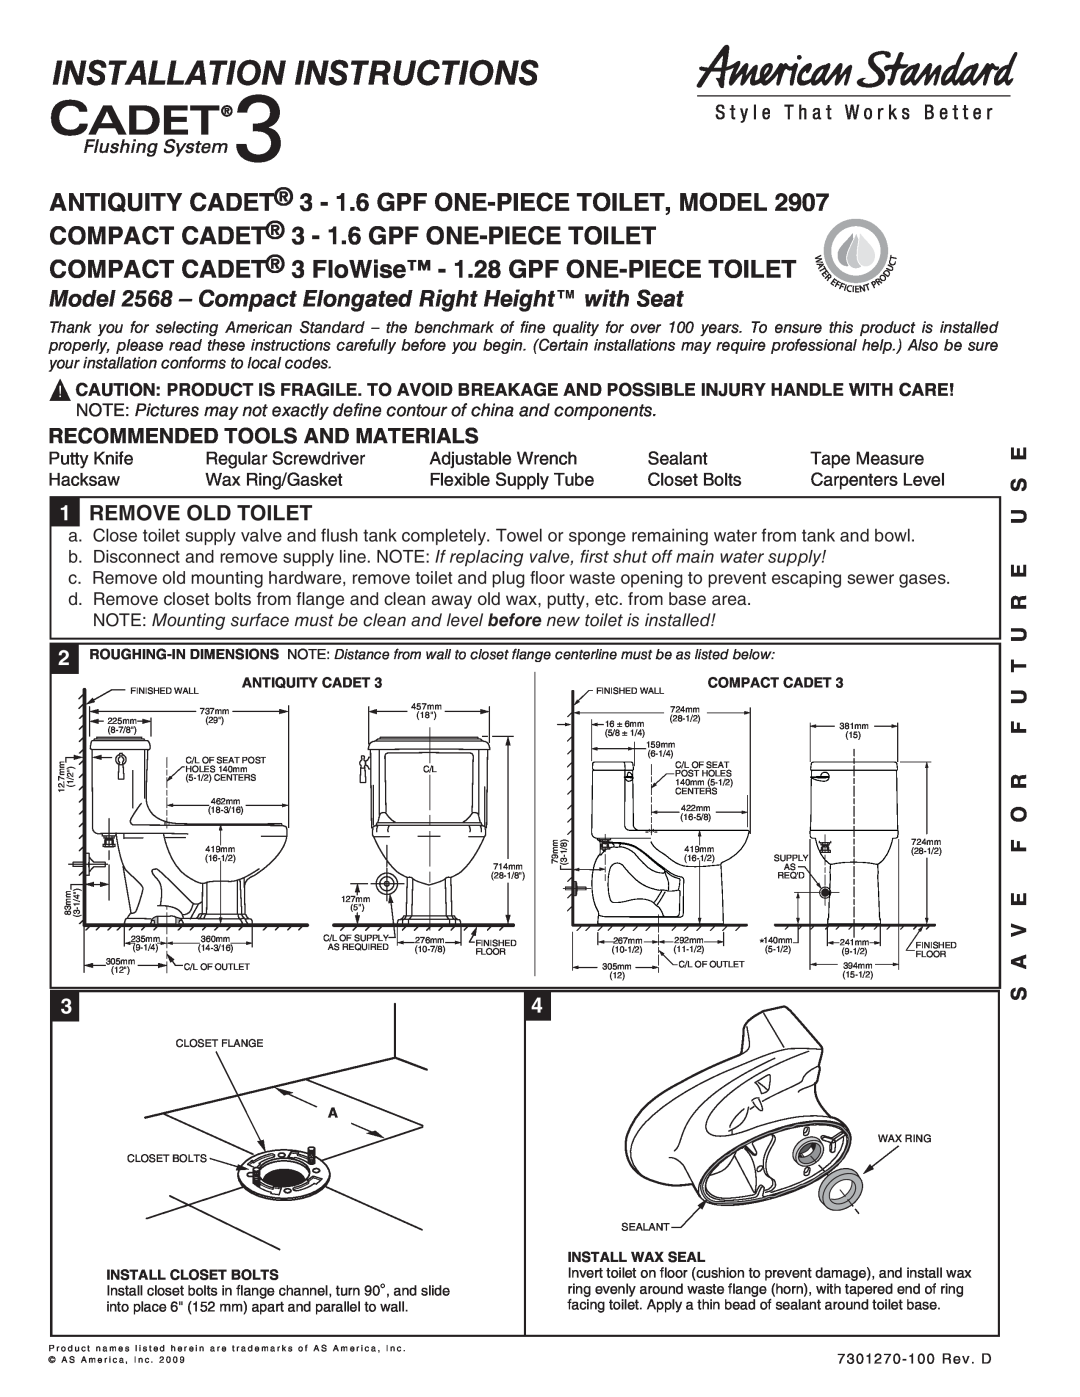 American Standard 2568 installation instructions Recommended Tools And Materials, Remove Old Toilet, U R E U S E, R F U T 